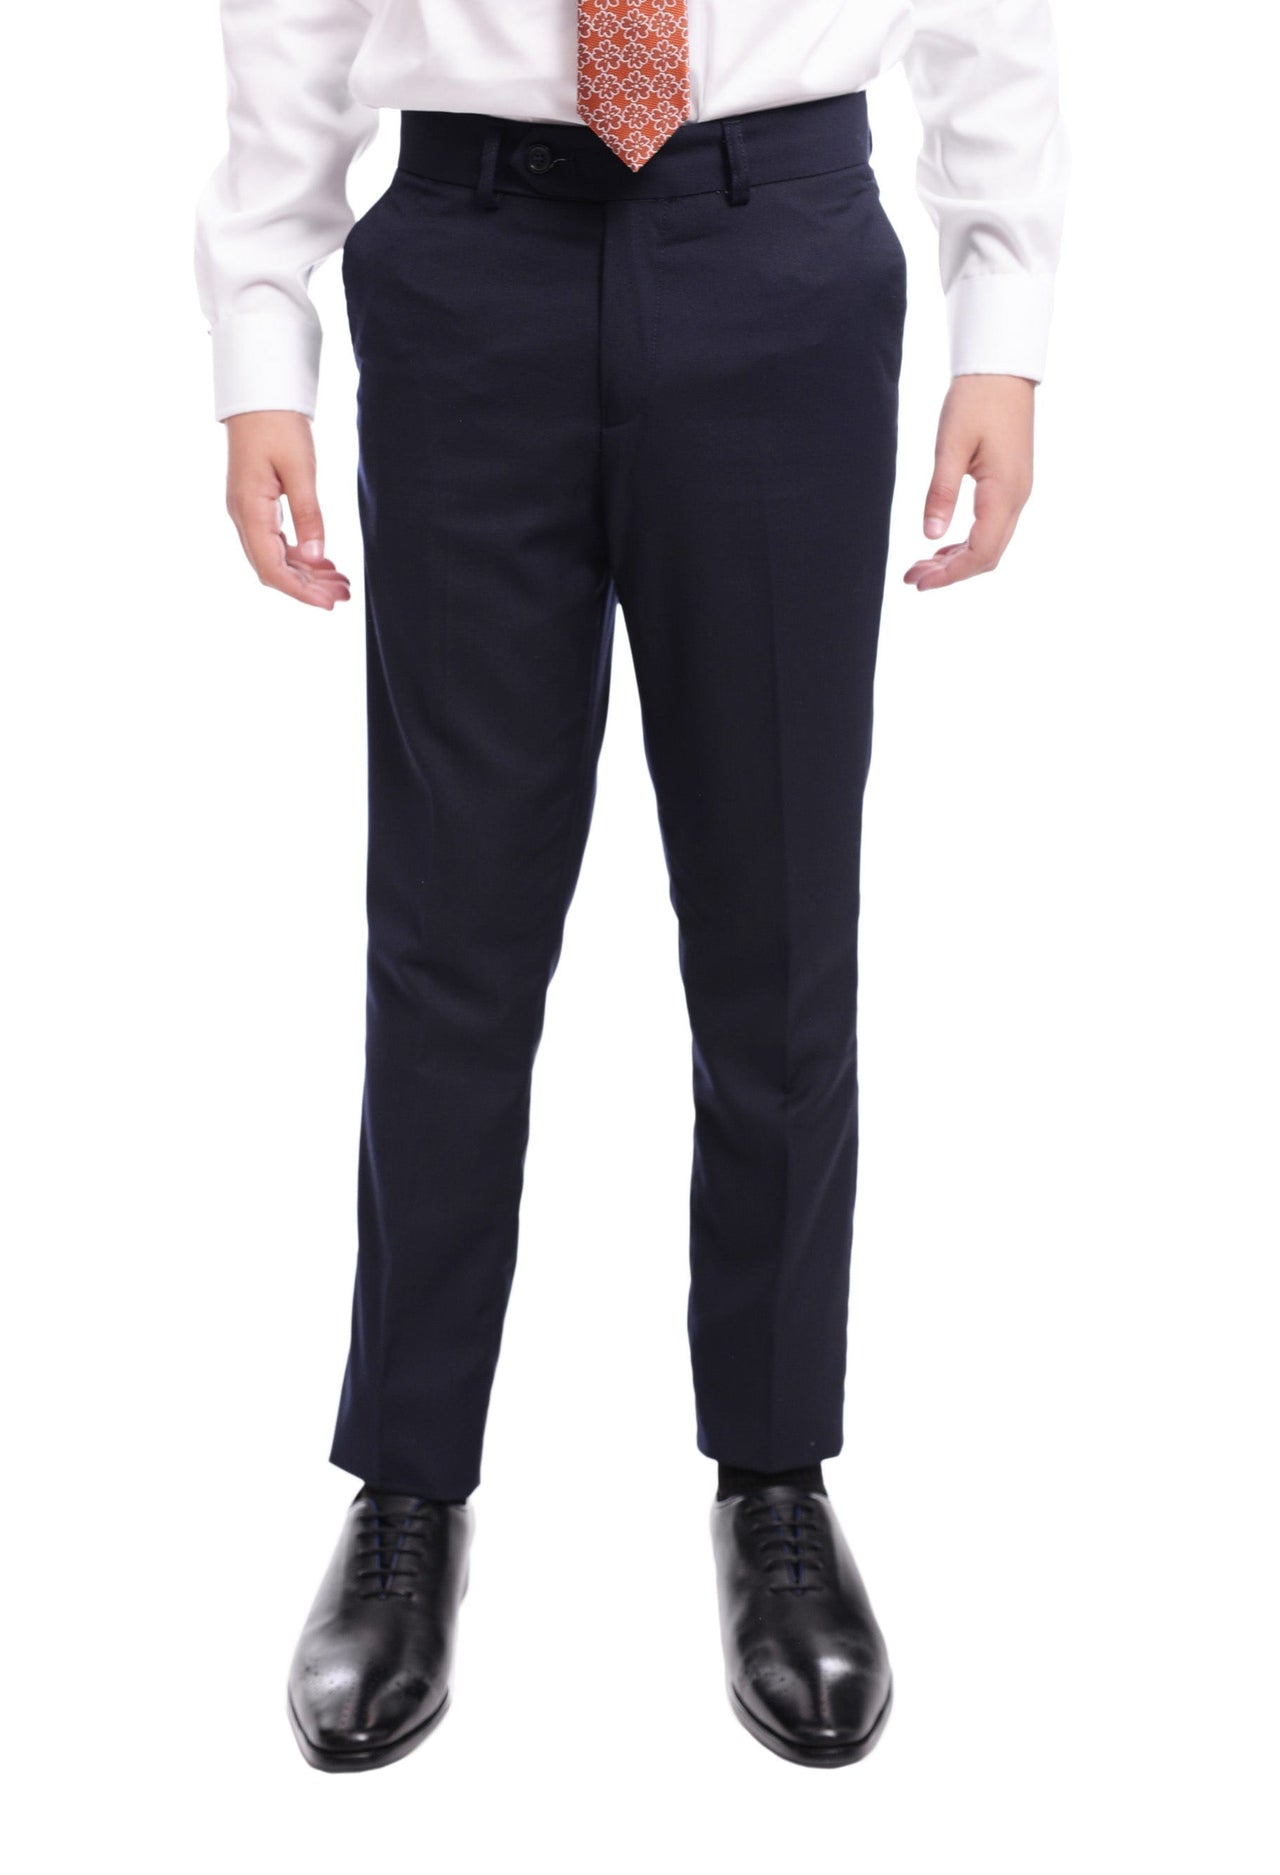 T.O. Boys T.O Boy's Solid Navy Blue Slim Fit Suit